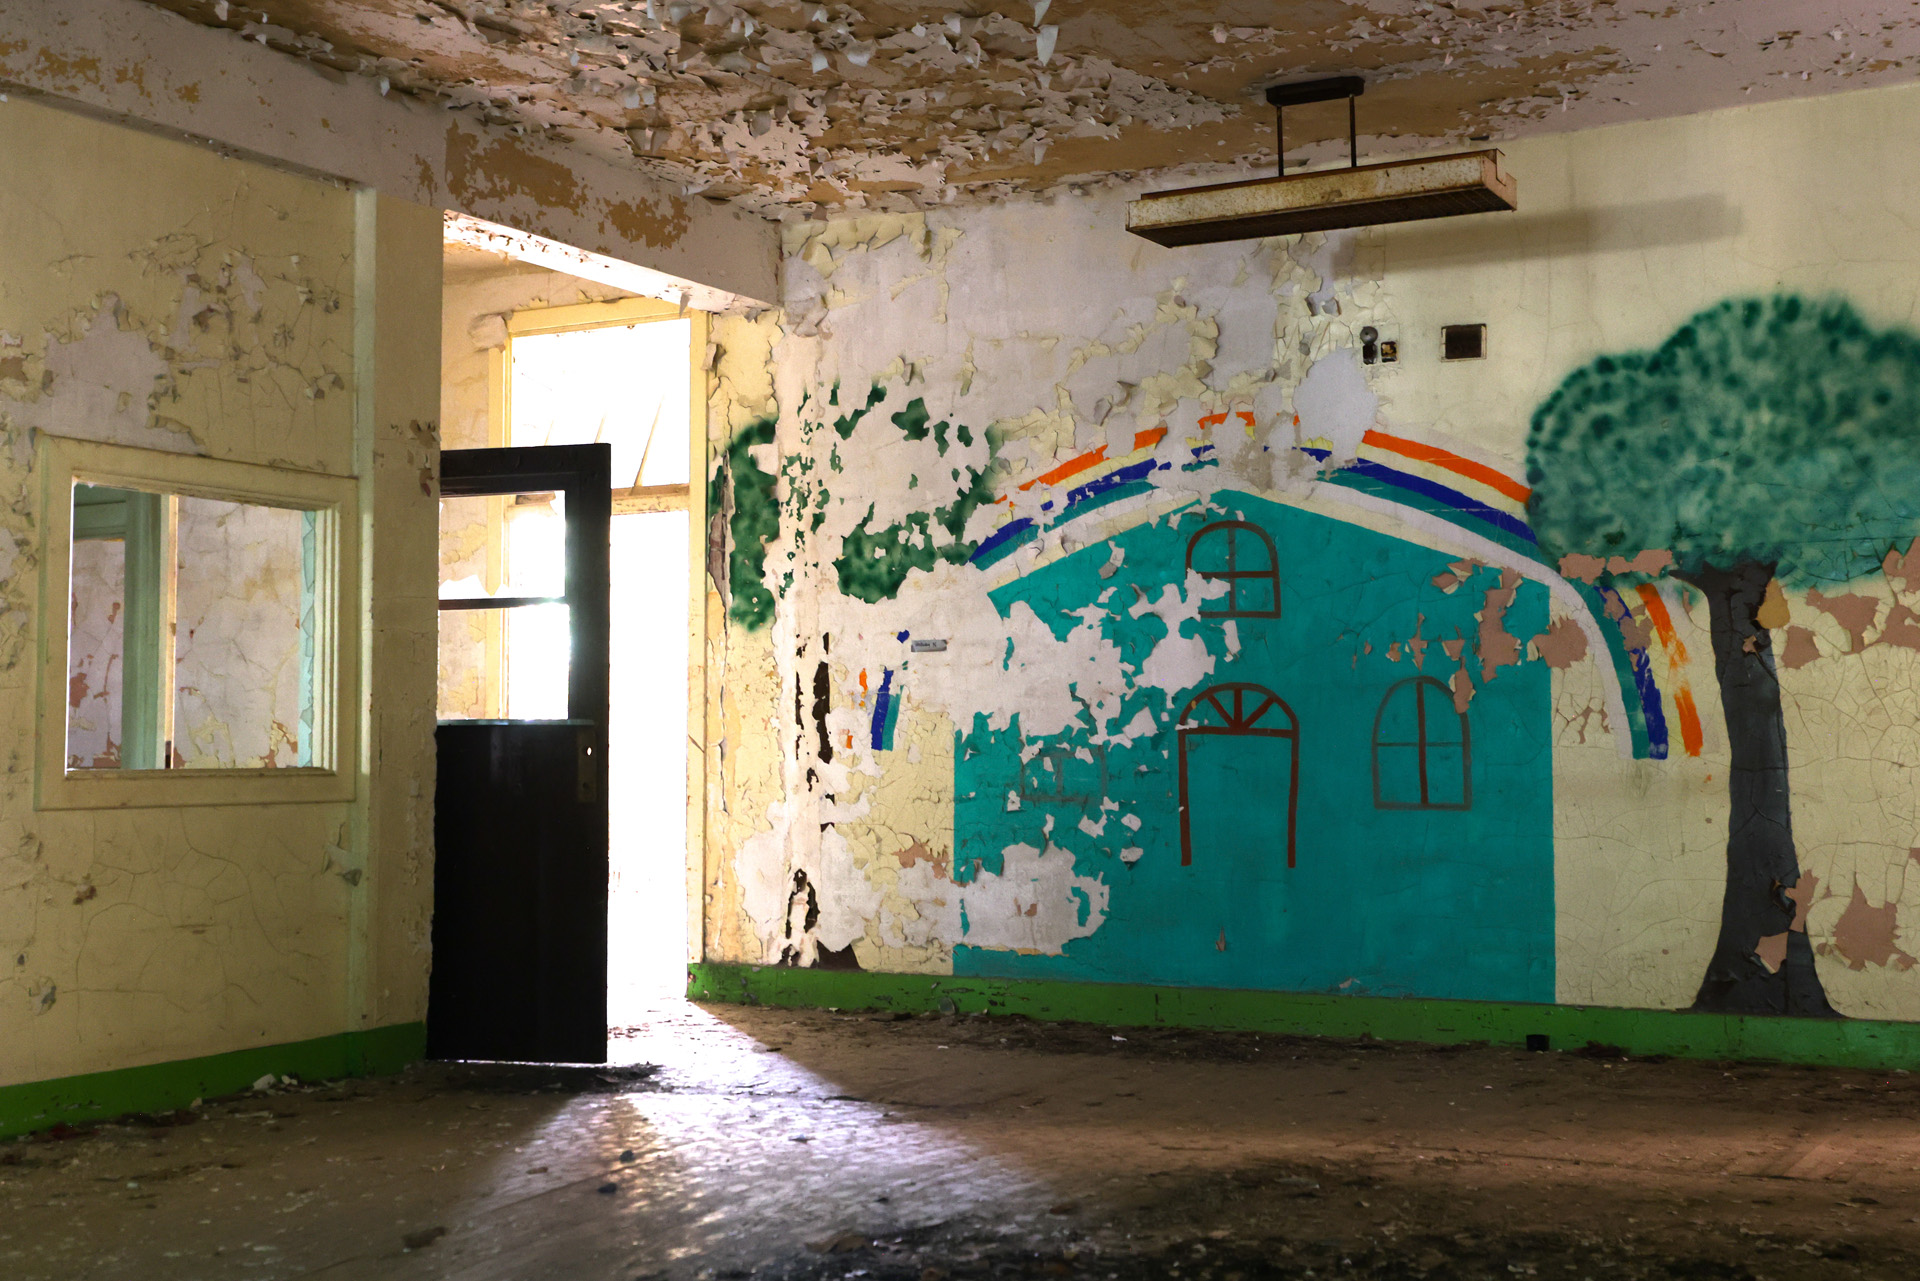 <p>A mural on a wall in the Gray building, a former men’s ward, at the Northern State Hospital grounds in Sedro-Woolley. (Karen Ducey / The Seattle Times)</p>
